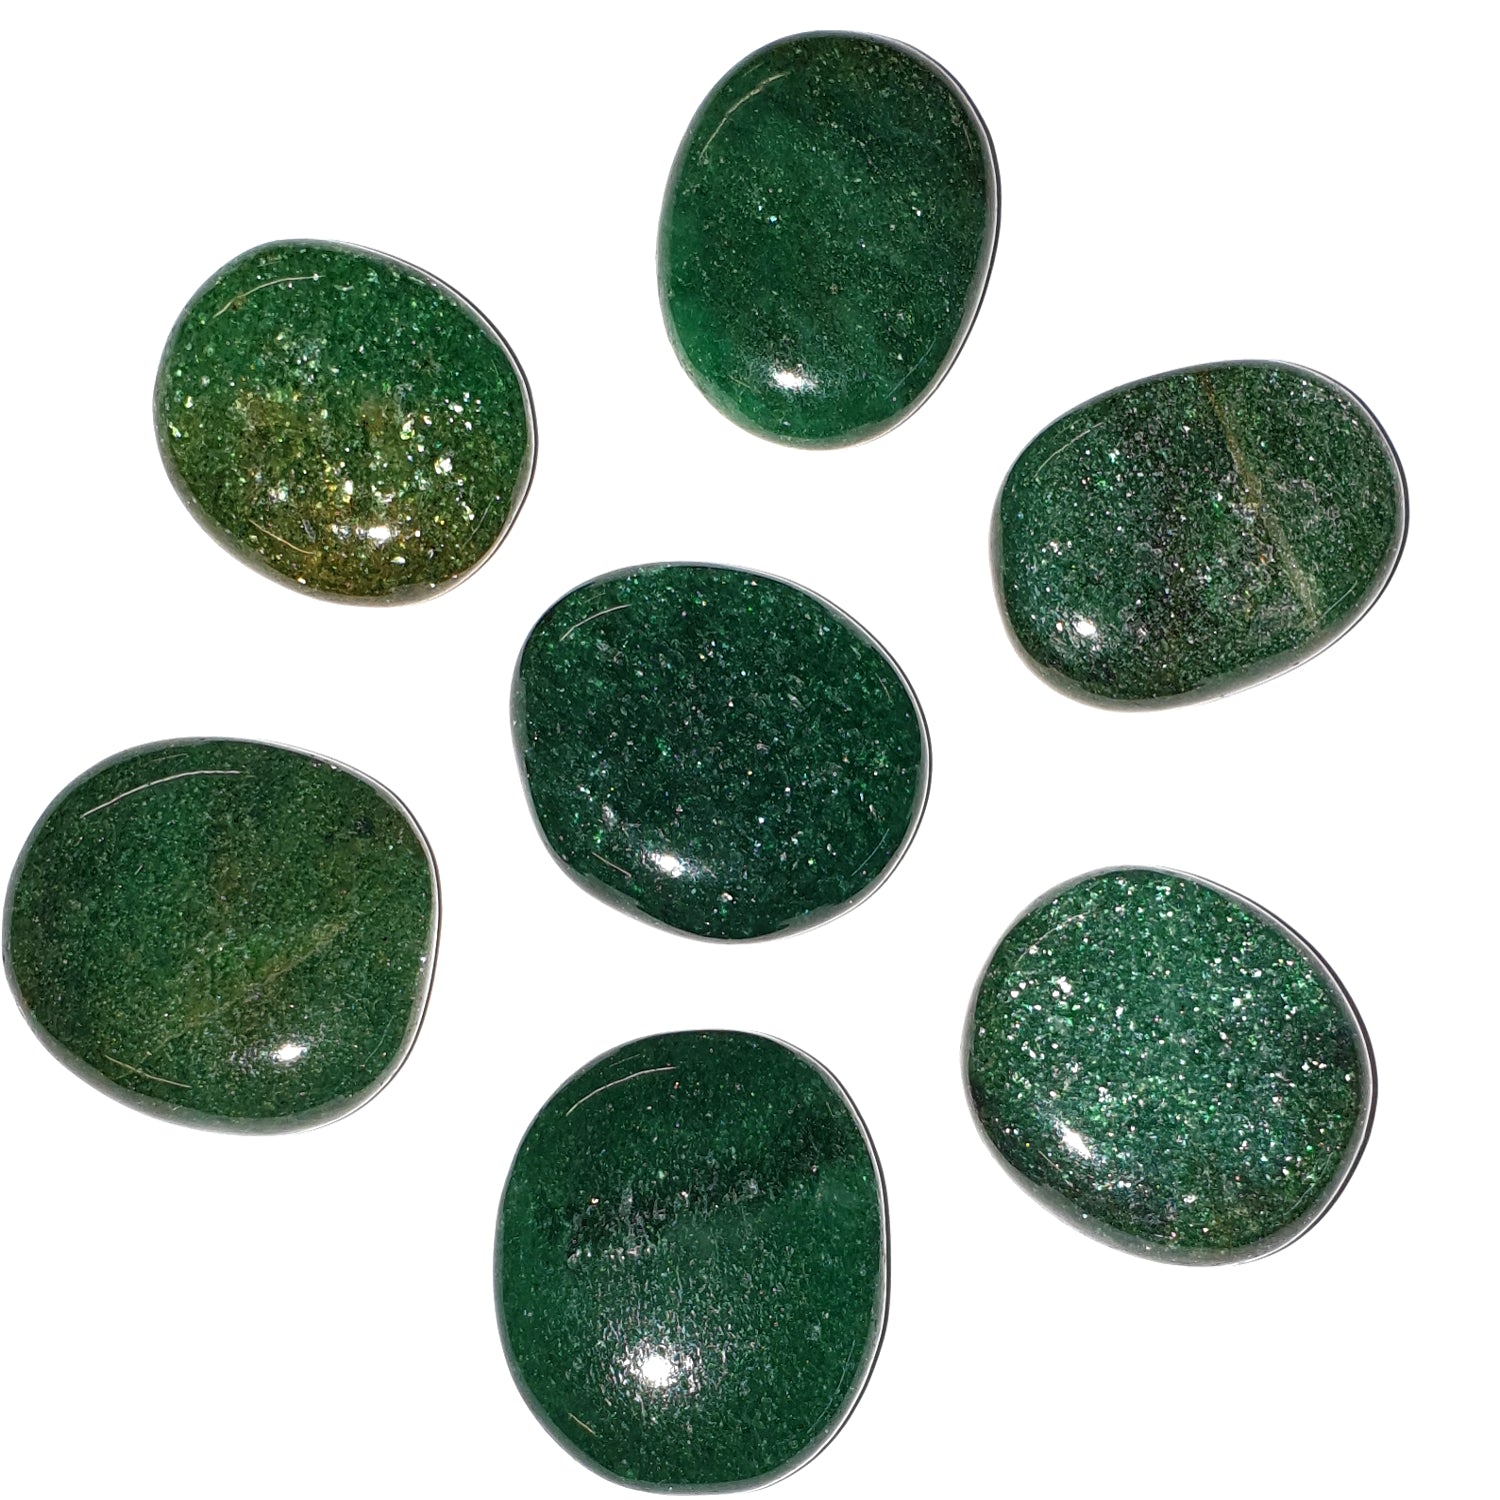 Aventurine Mini Ovals are approx 20mm long.  Each Oval has been hand polished.  Aventurine provides a balance of yin yang energies, enhancing creativity, supplementing motivation in activities and promoting a pioneering outlook.  Aventurine is an abundance stone when placed within the home encourages everyone to have the same outlook.